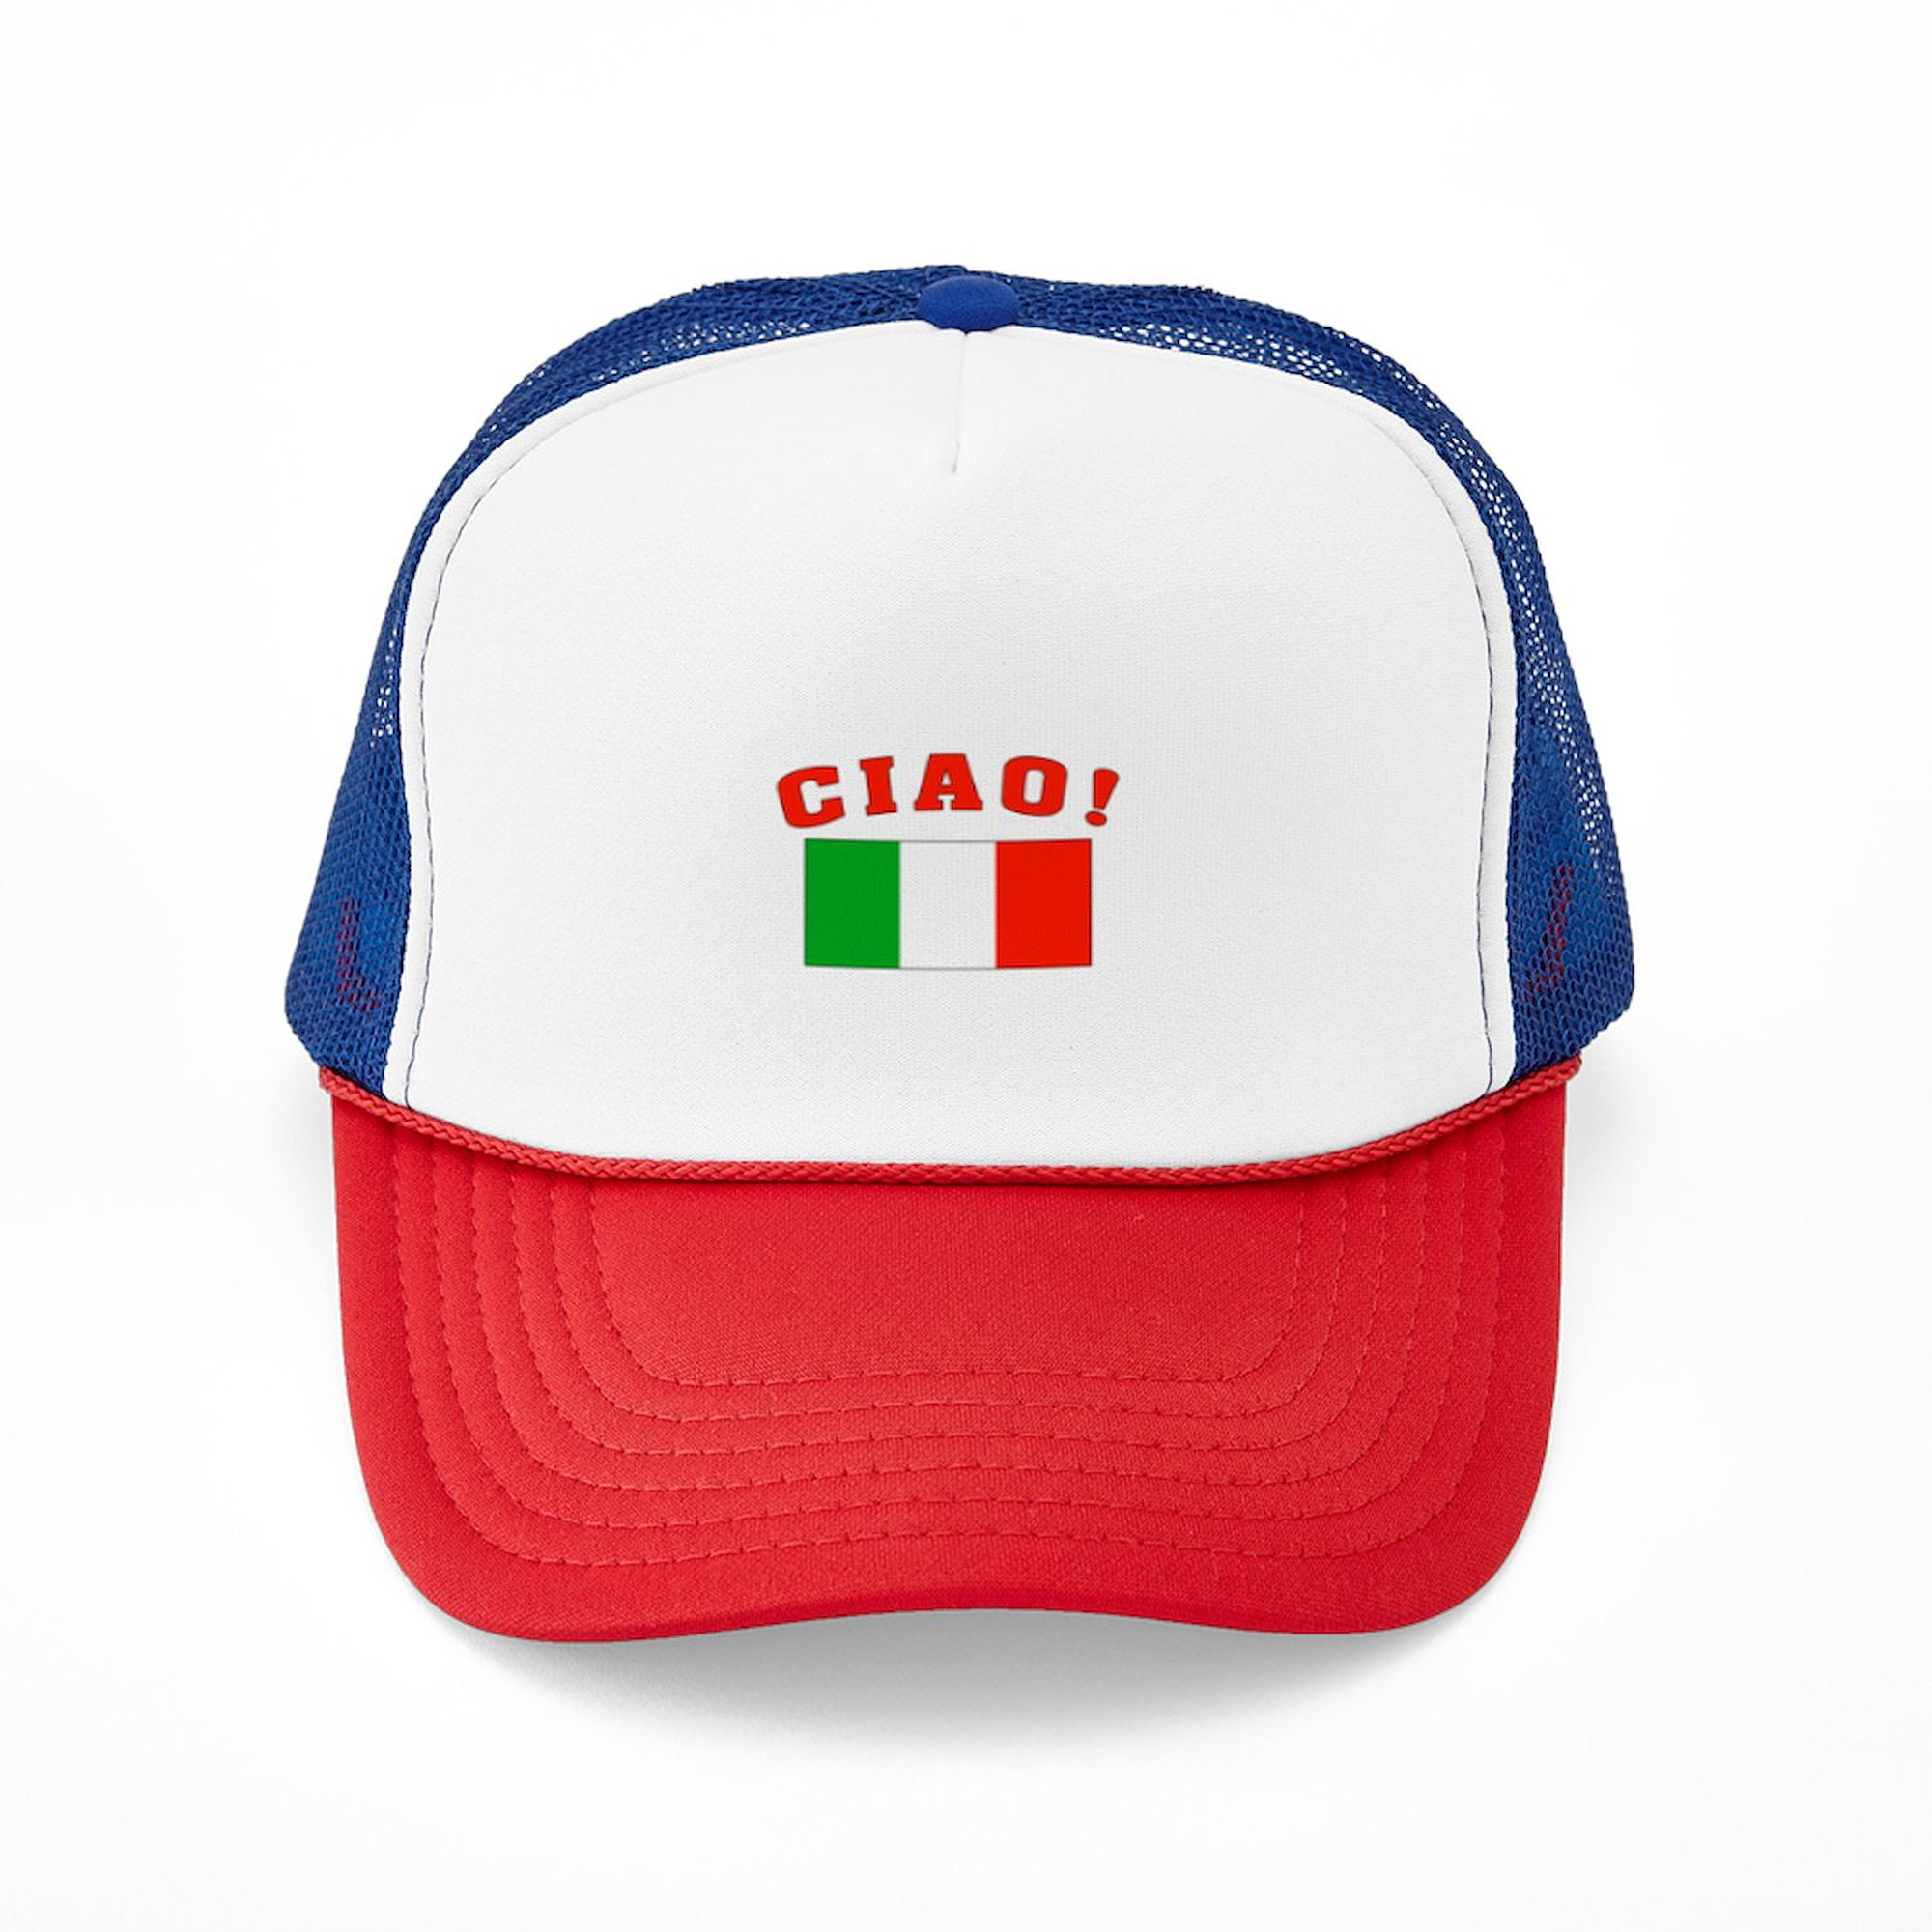 Funny Baseball Hats for Men I Love My Country India Casquette